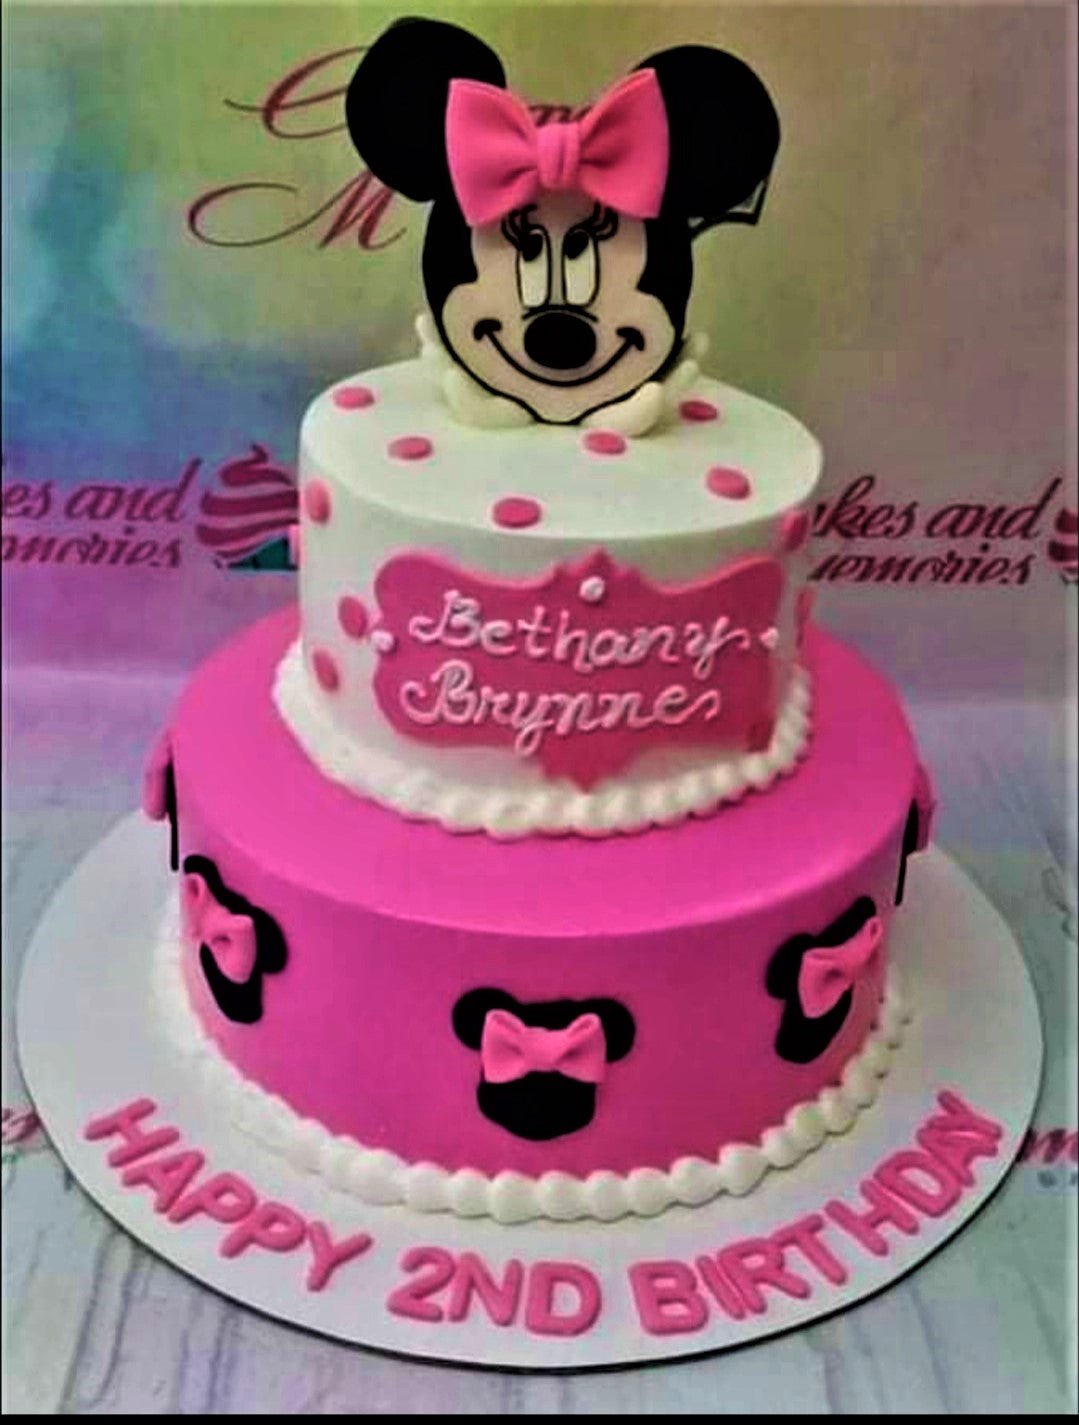 Katie Young's Cakes - Minnie Mouse is always a cute cake design for a 1  year old #katieyoungscakes #babycakes #1stbirthdaycake #minniemouse #disney  #cake #babygirl #baby #party #birthday #kidscakes #childrensparty  #ipswichcakes #brisbanecakes ...